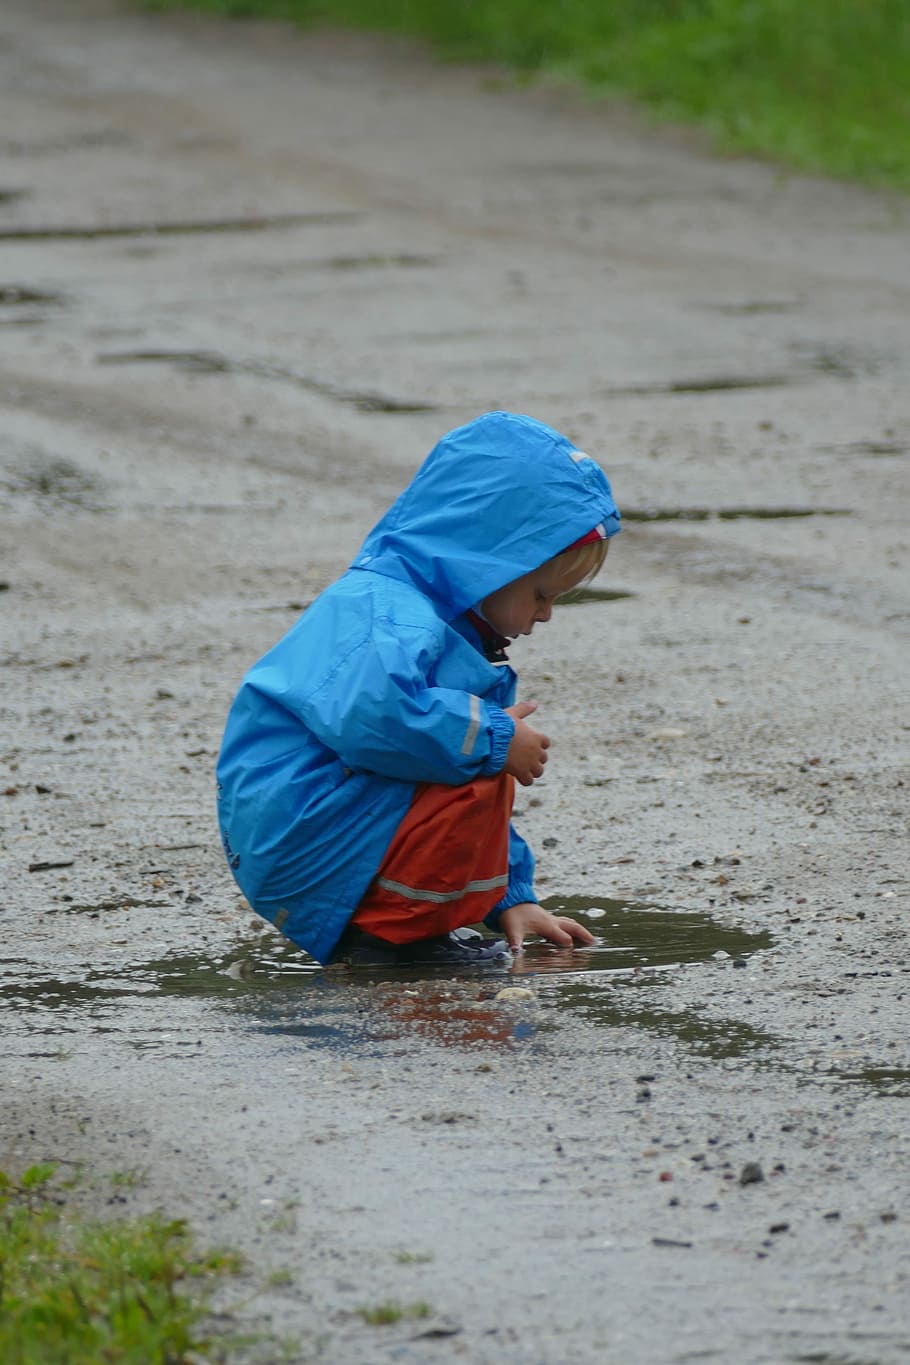 Children Playing, Puddle, rain, childhood, one boy only, boys, one person, full length, sand, child